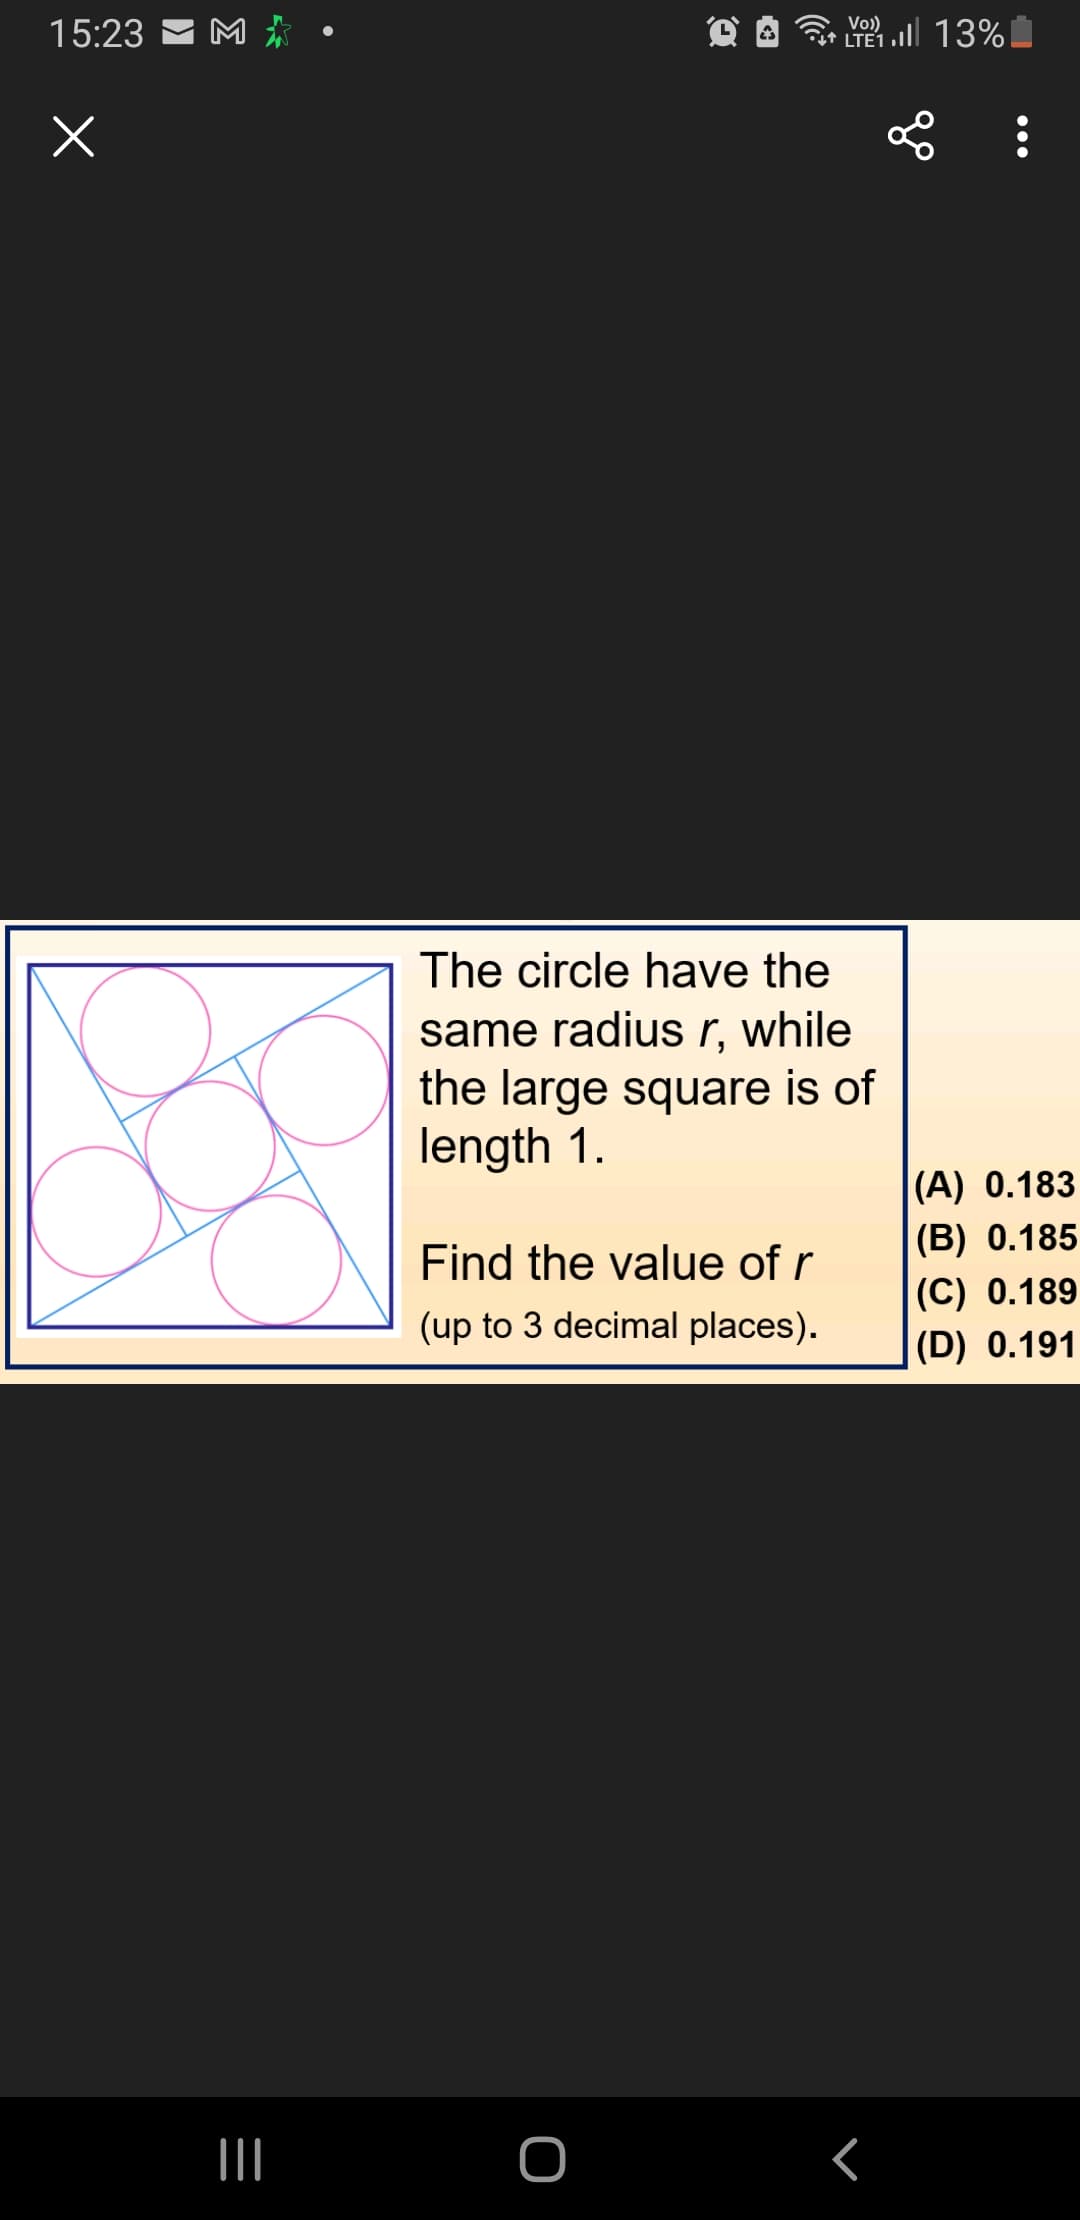 15:23
x
M
|||
The circle have the
same radius r, while
the large square is of
length 1.
Find the value of r
(up to 3 decimal places).
LTE 1 .Il 13%!
O
L:
<
(A) 0.183
(B) 0.185
(C) 0.189
(D) 0.191